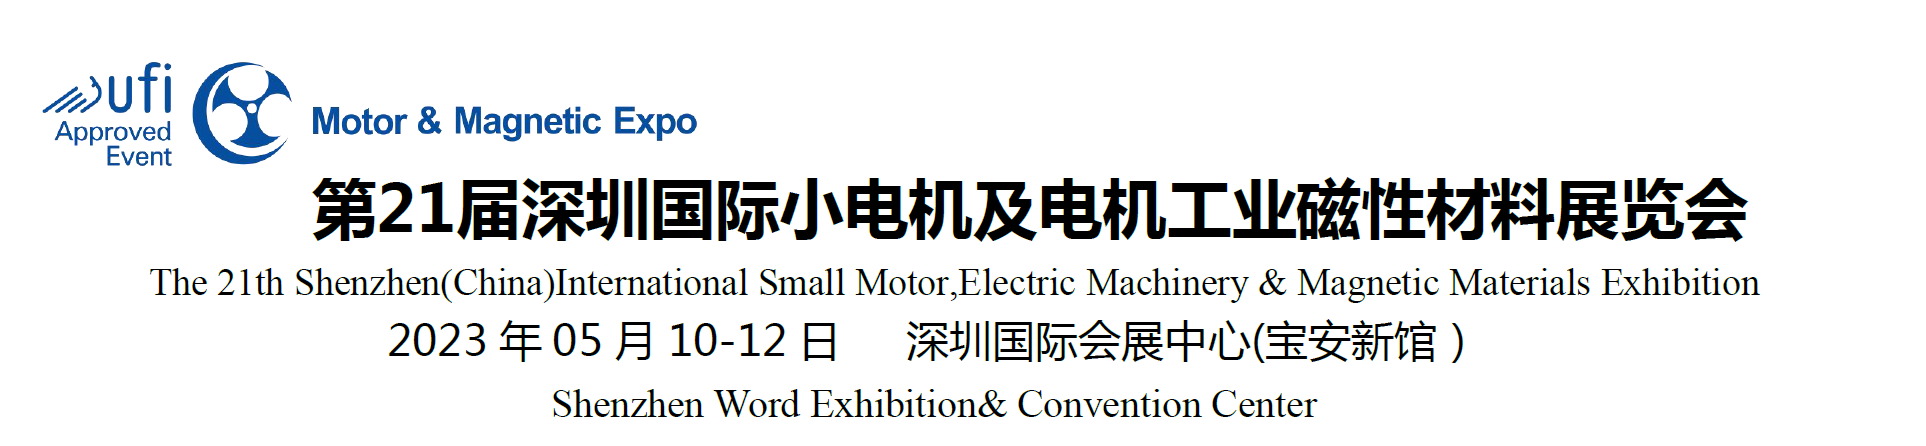 NICHIBO MOTOR (SHENZHEN) ATTENDS THE 21th SHENZHEN (CHINA) INTERNATIONAL SMALL MOTOR, ELECTRIC MACHINERY & MAGNETIC MATERIALS EXHIBITION